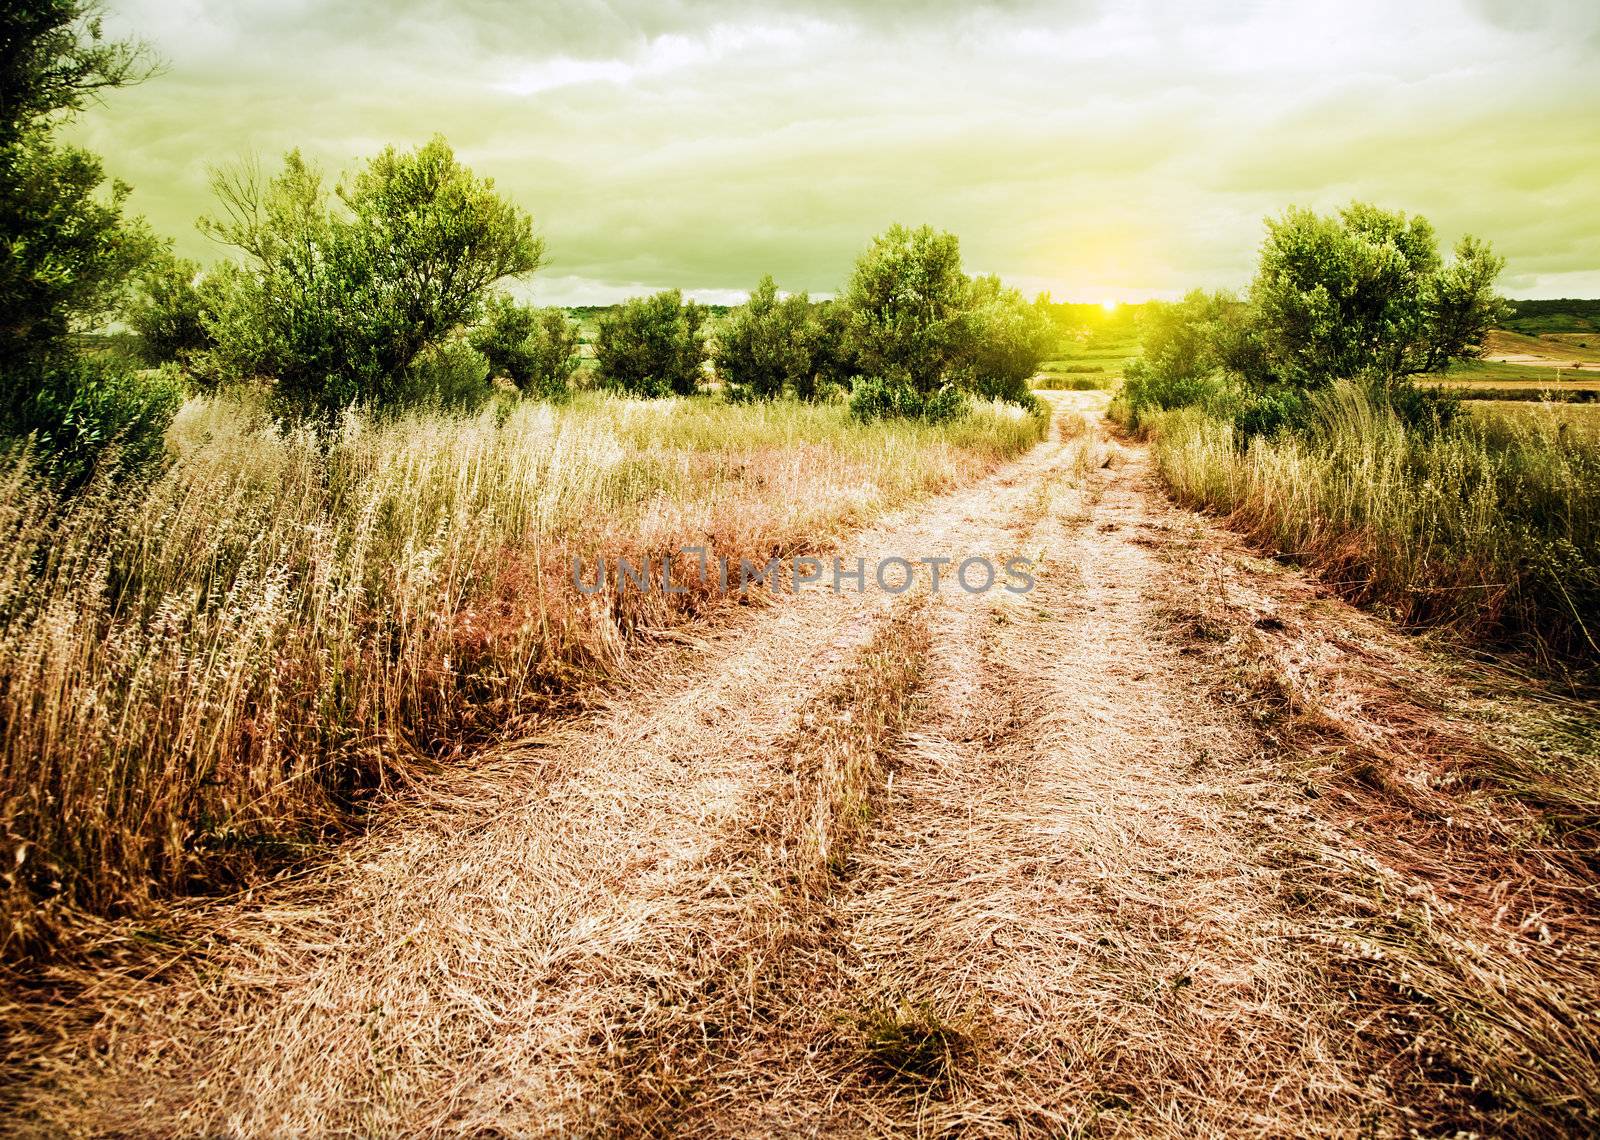 Sunset rural landscape with road and wheat field